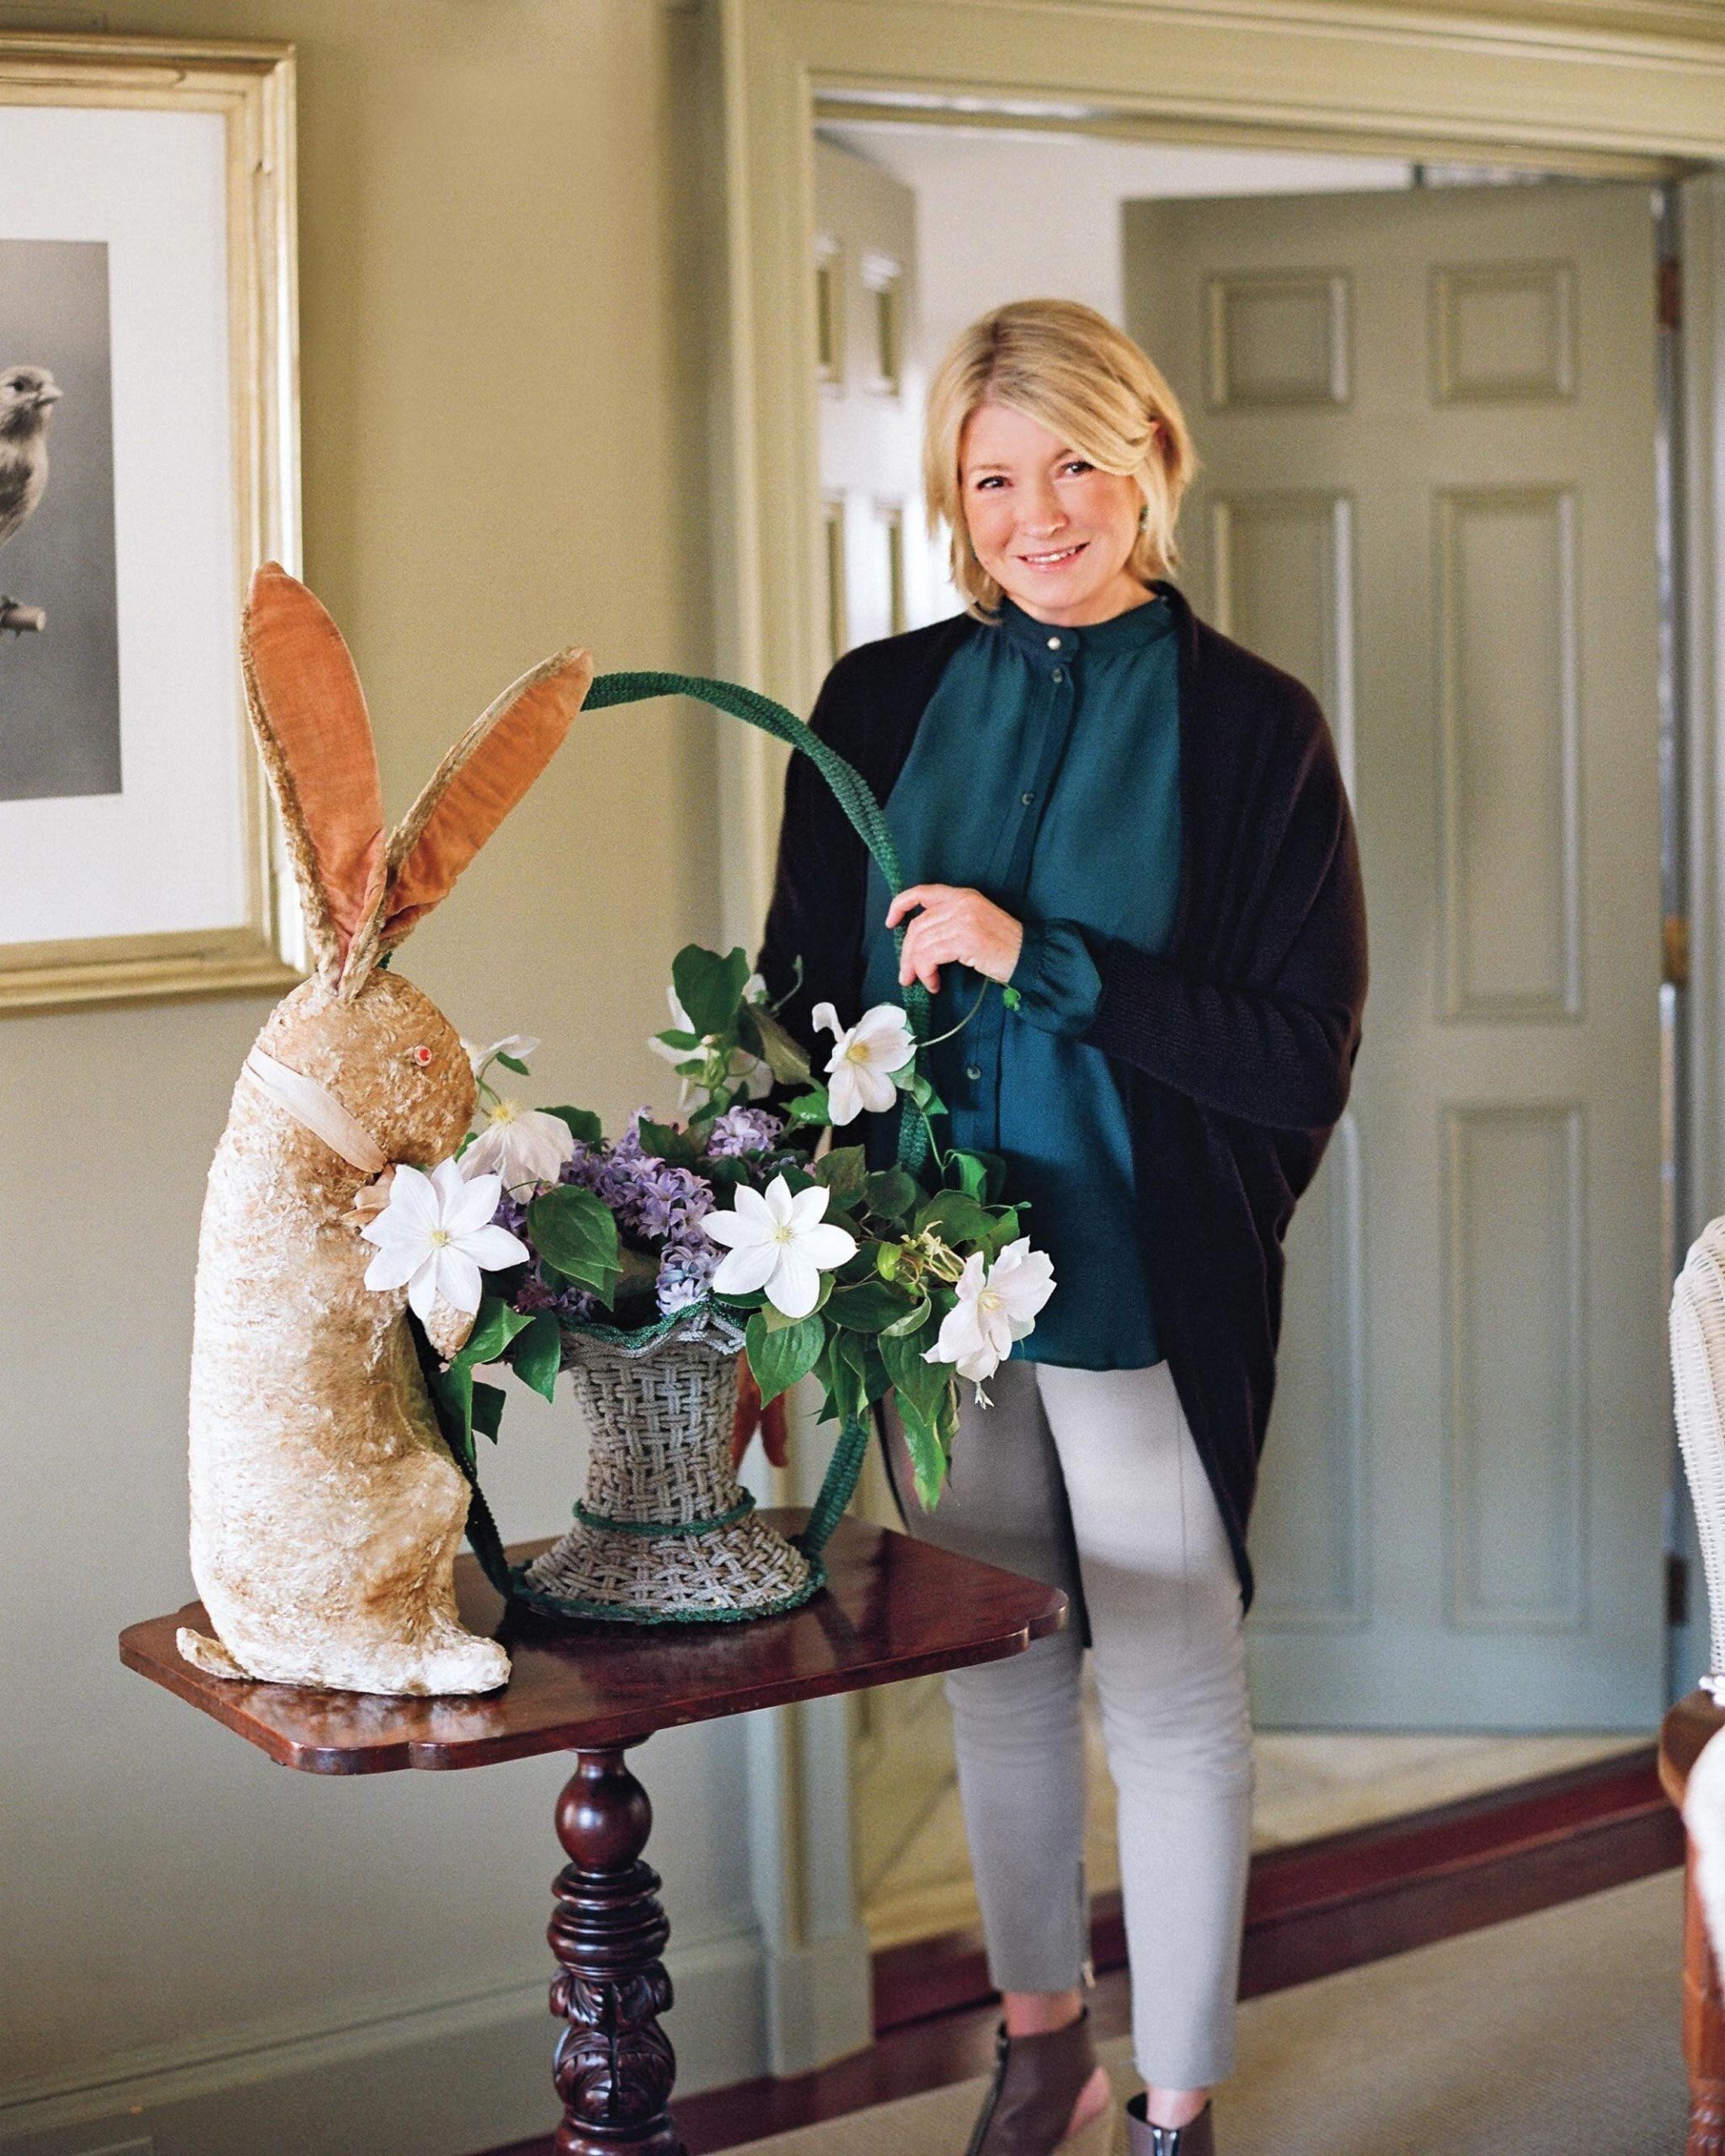 Martha Stewart Easter Dinner
 Get Inspired by Martha s Russian Themed Easter Menu and